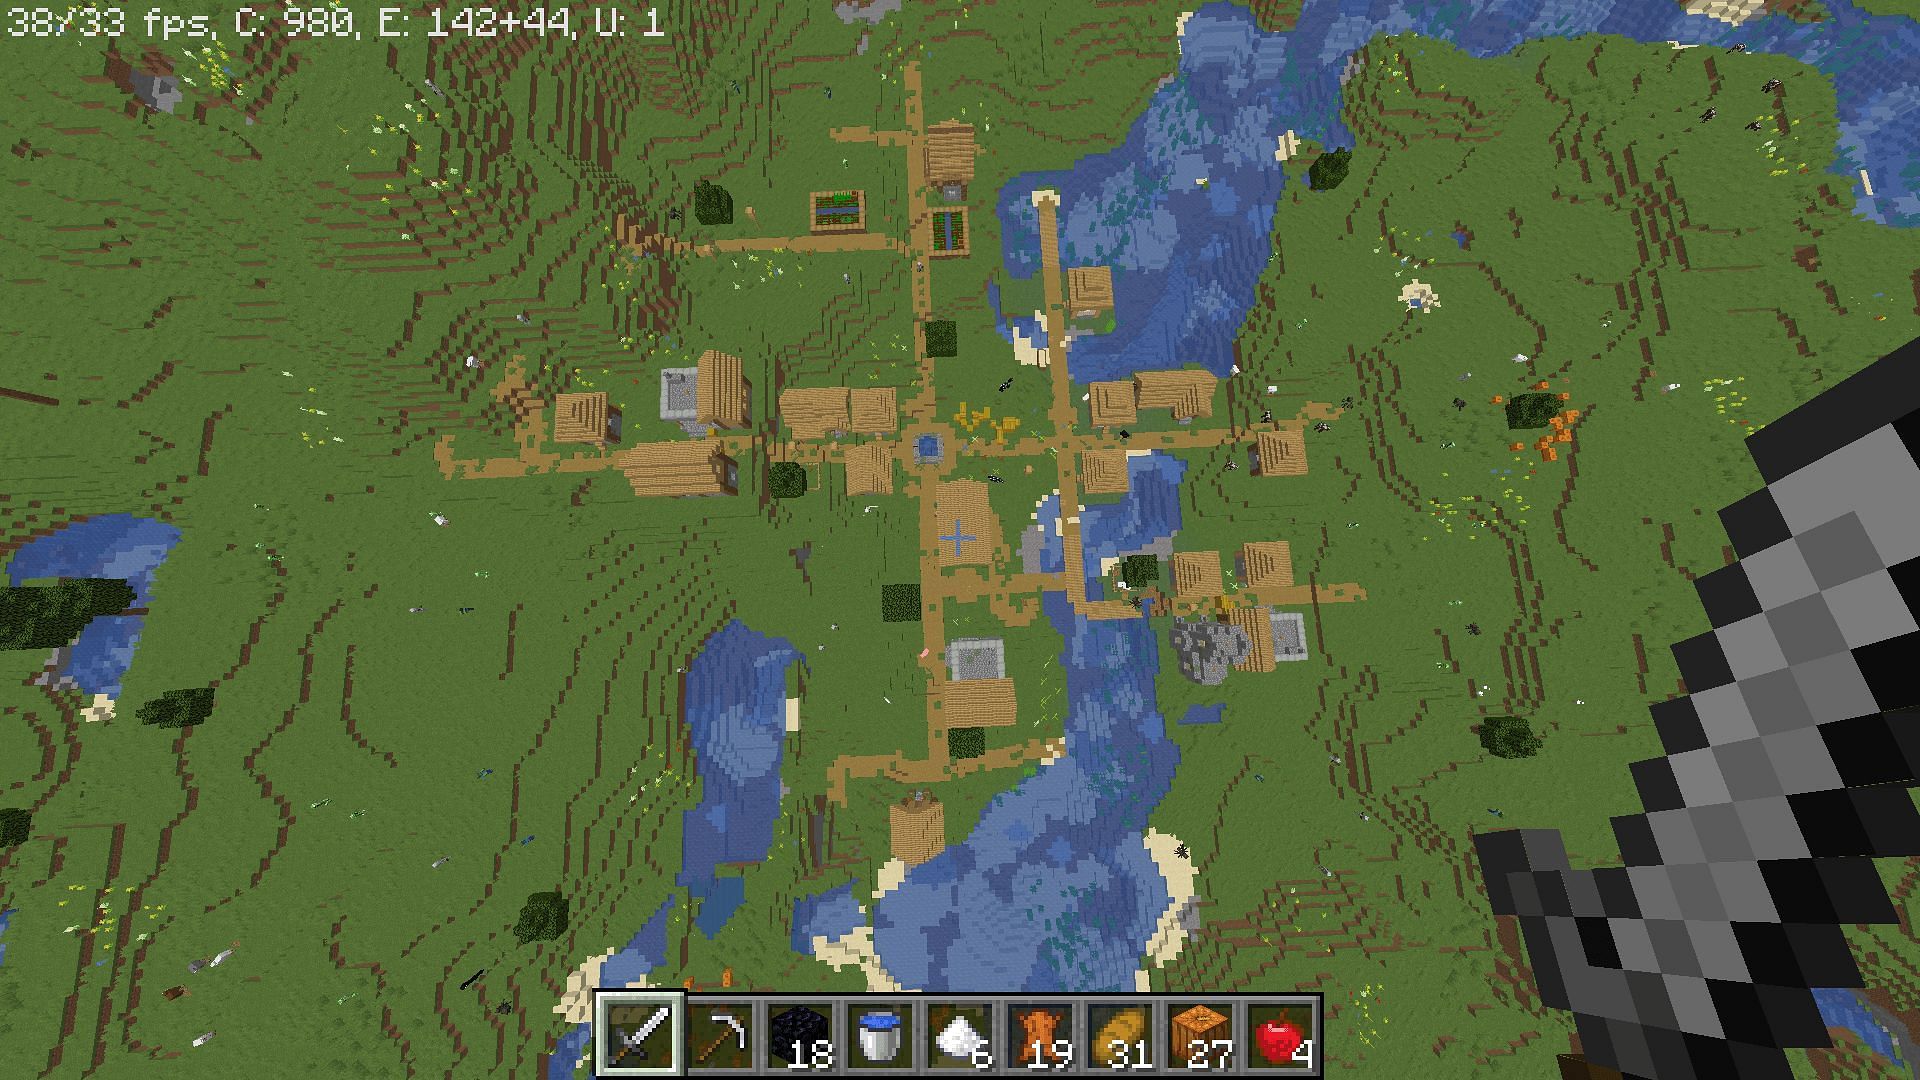 This seed provides a triple blacksmith village if players are willing to venture to it (Image via u/slaninka120/Reddit)